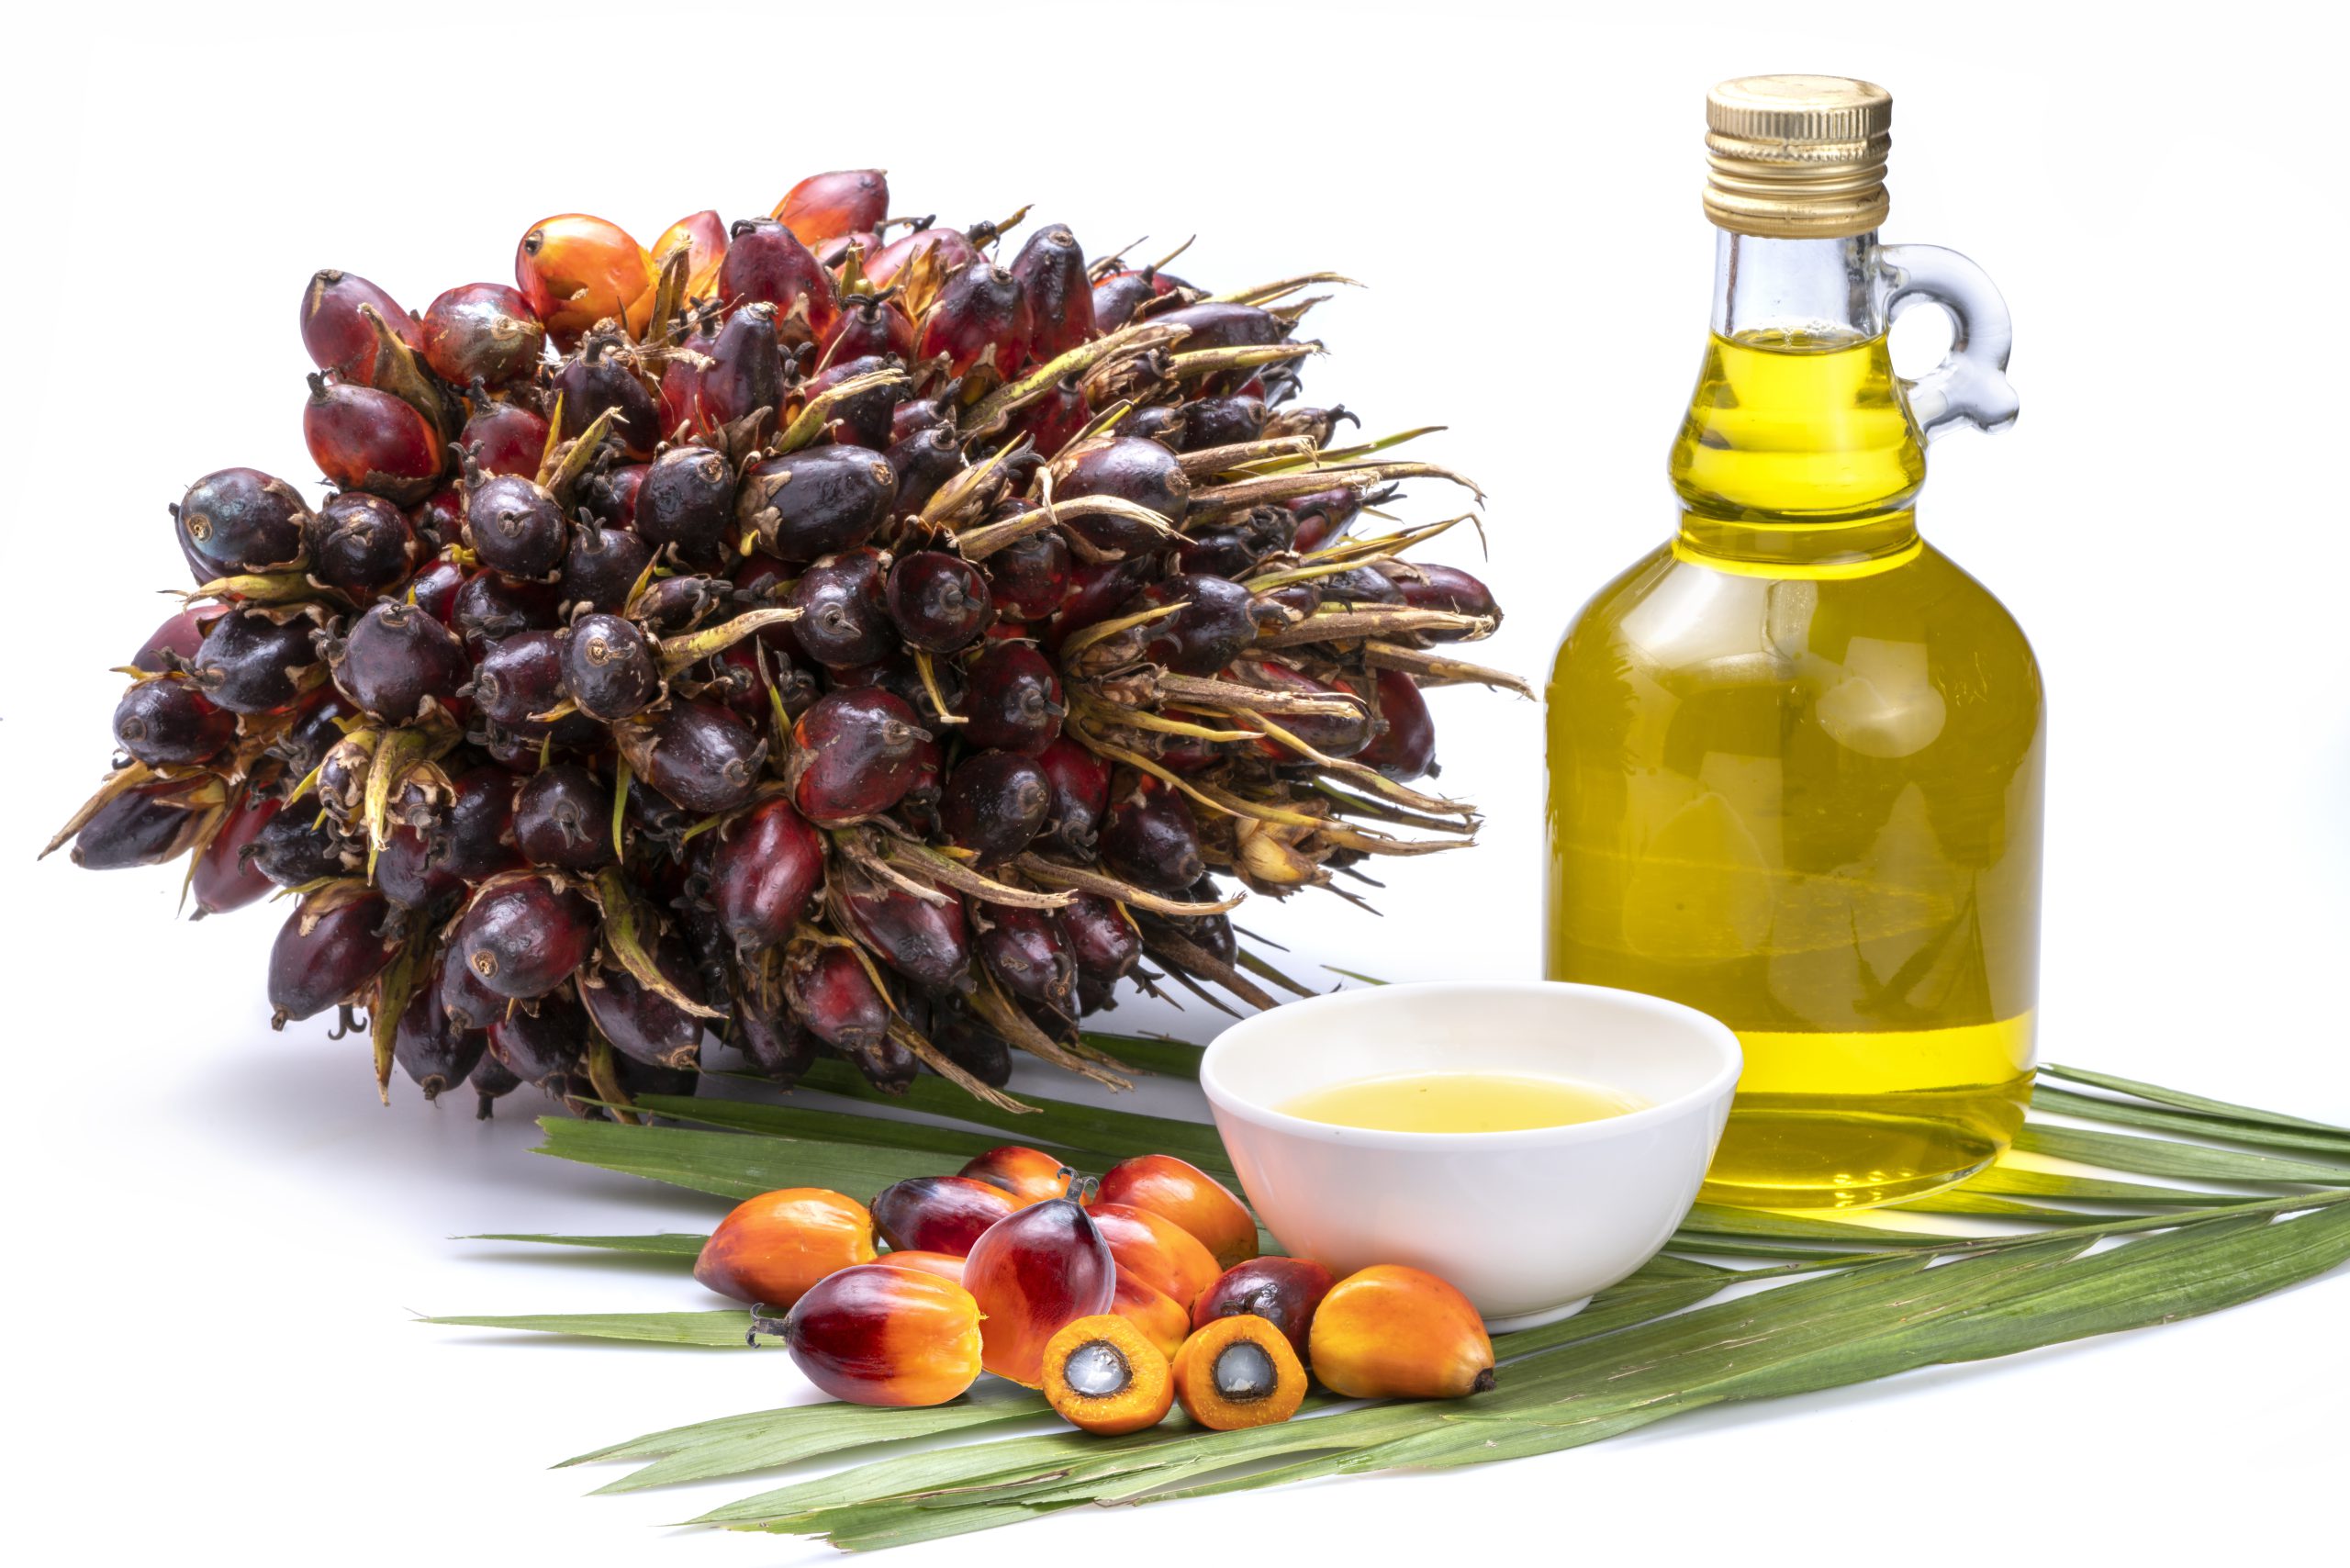 fresh-palm-oil-fruits-cooking-glass-bottles-palm-oil-palm-leaves-isolated-white-background